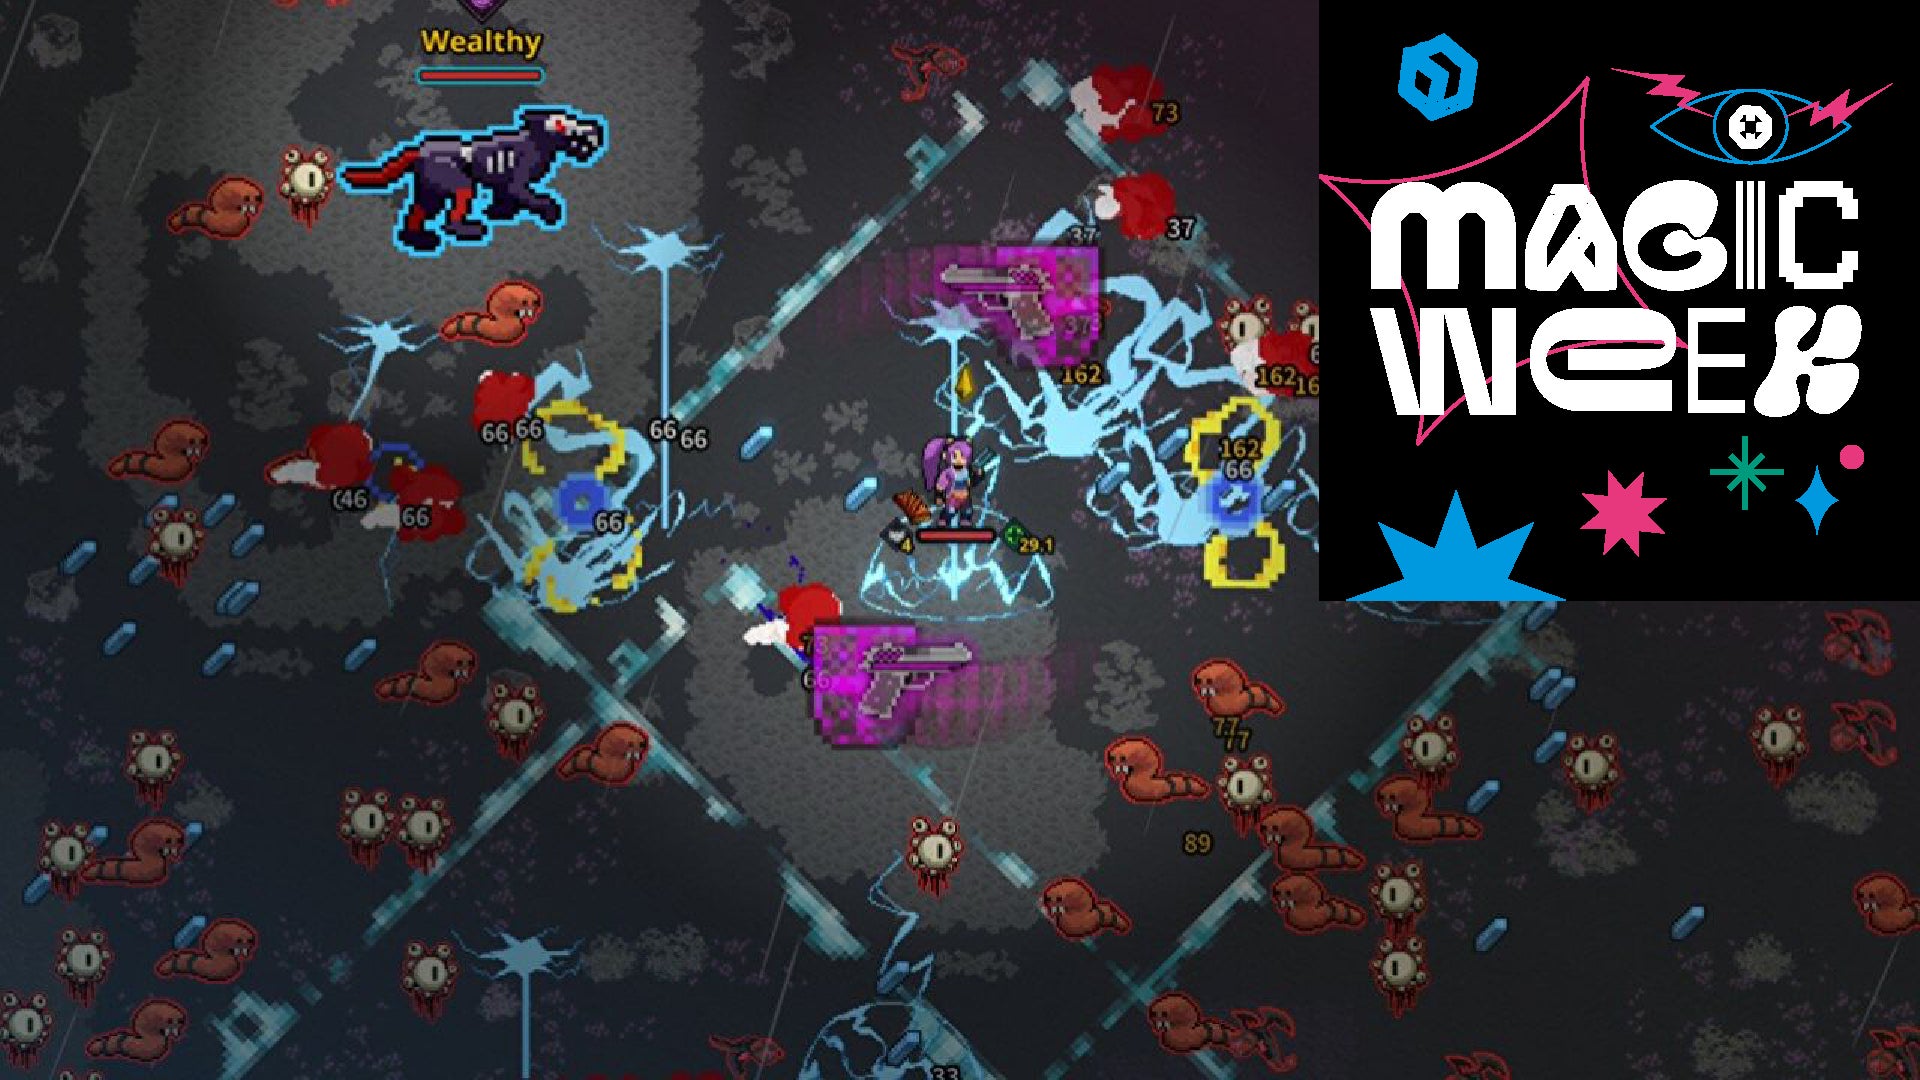 A chaotic battle scene in reverse bullet hell magic game Spellbook Demonslayers, with the RPS Magic Week logo overlaid in the top right corner